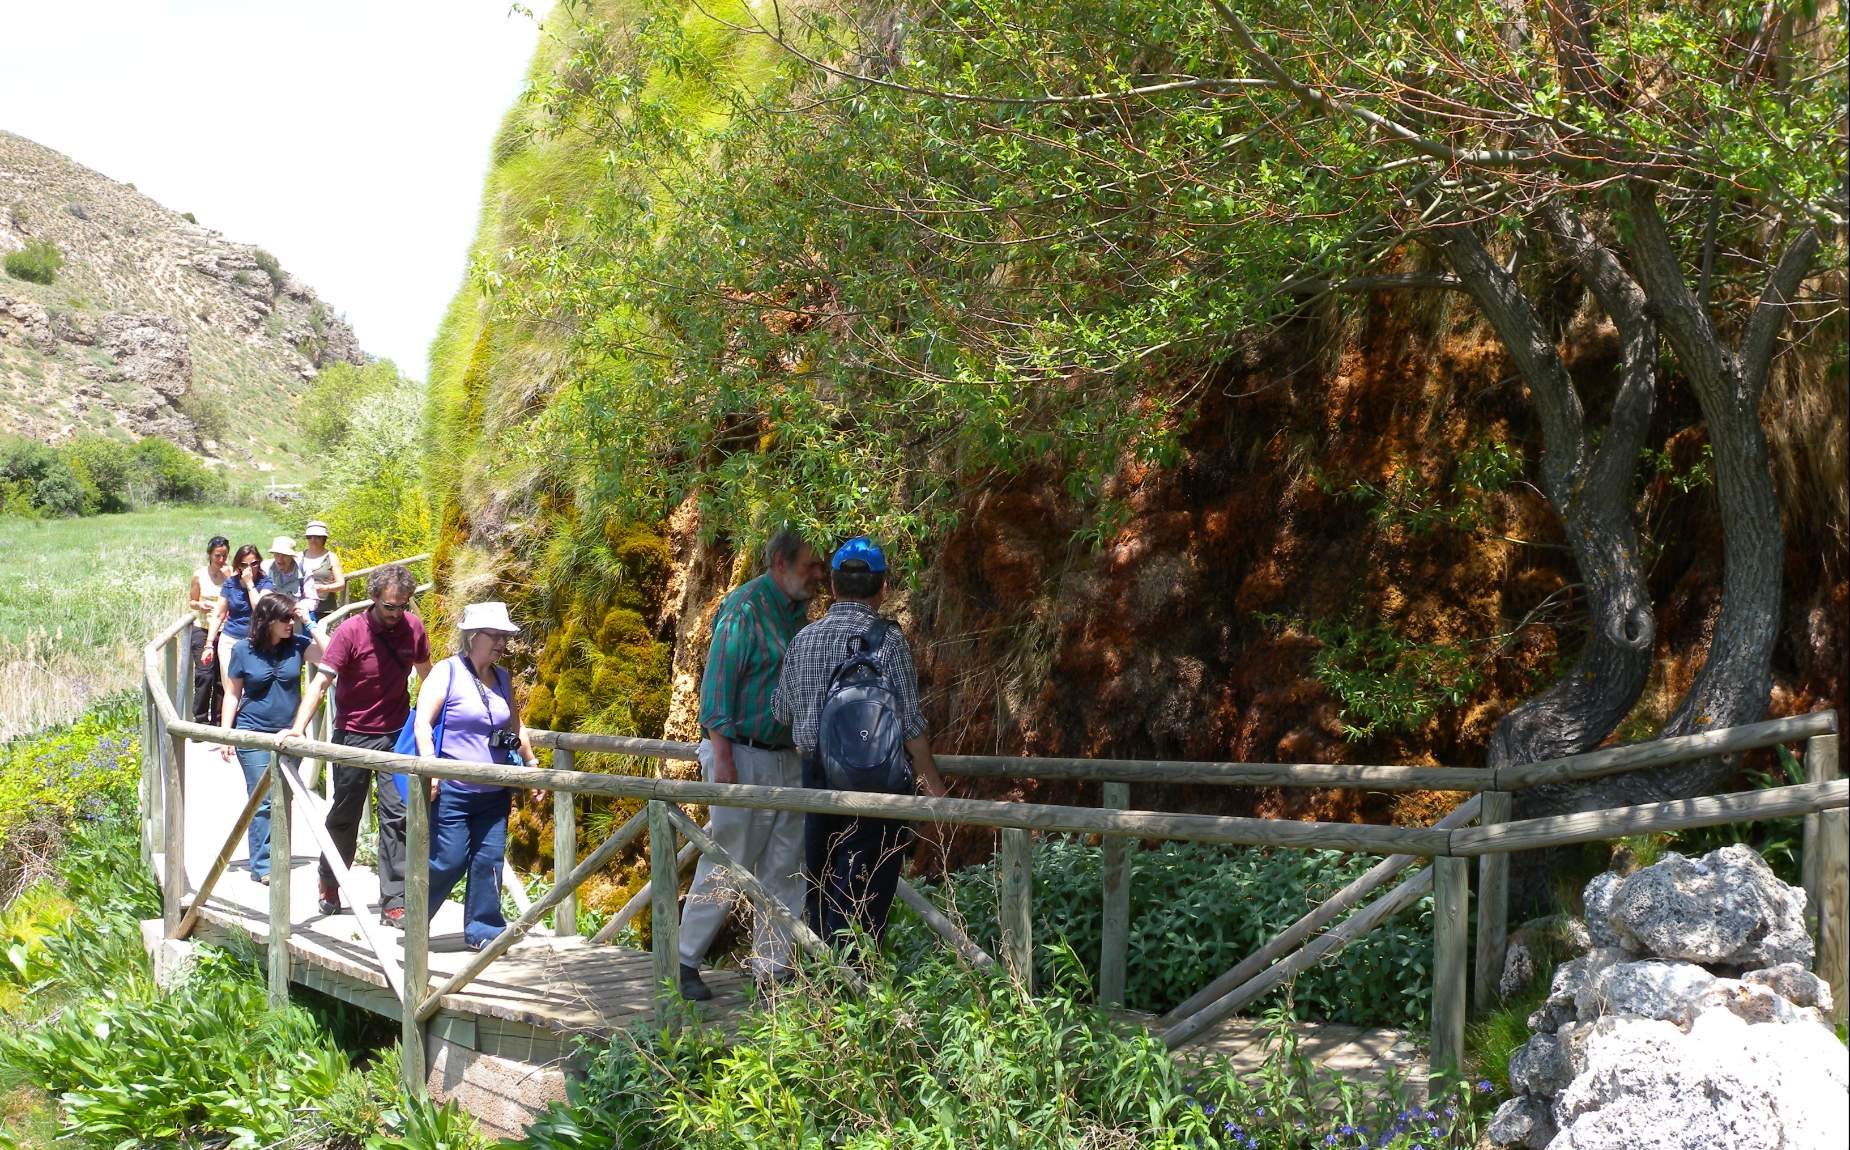 Several people on a wooden bridge in the natural park